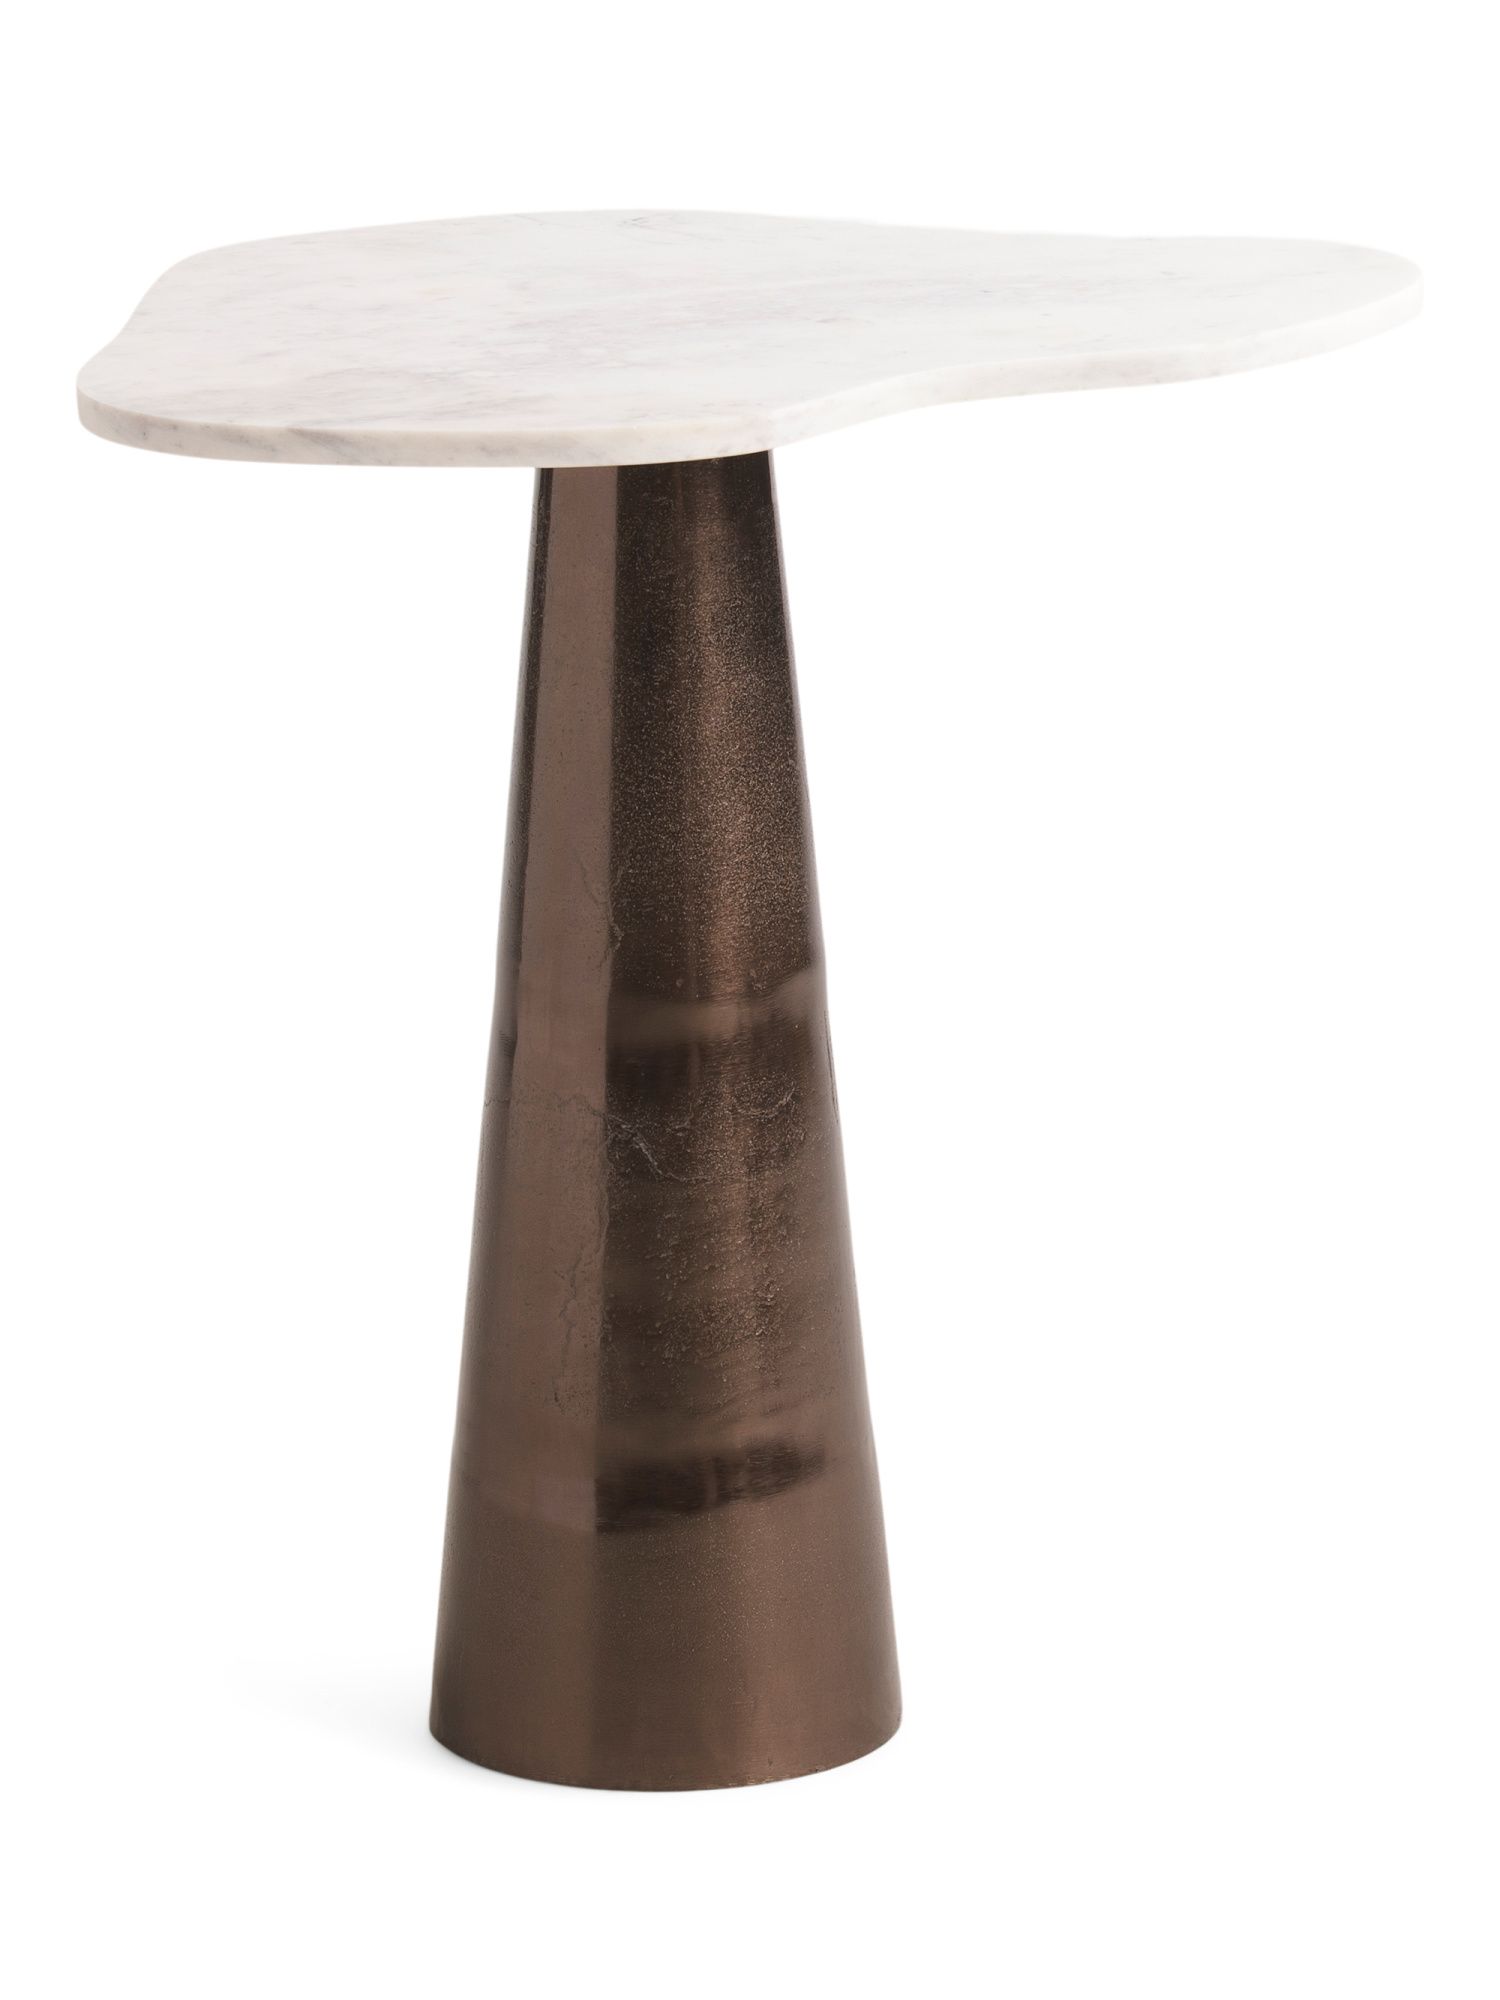 27in Siena Organic Shaped Marble Top Table | Marshalls